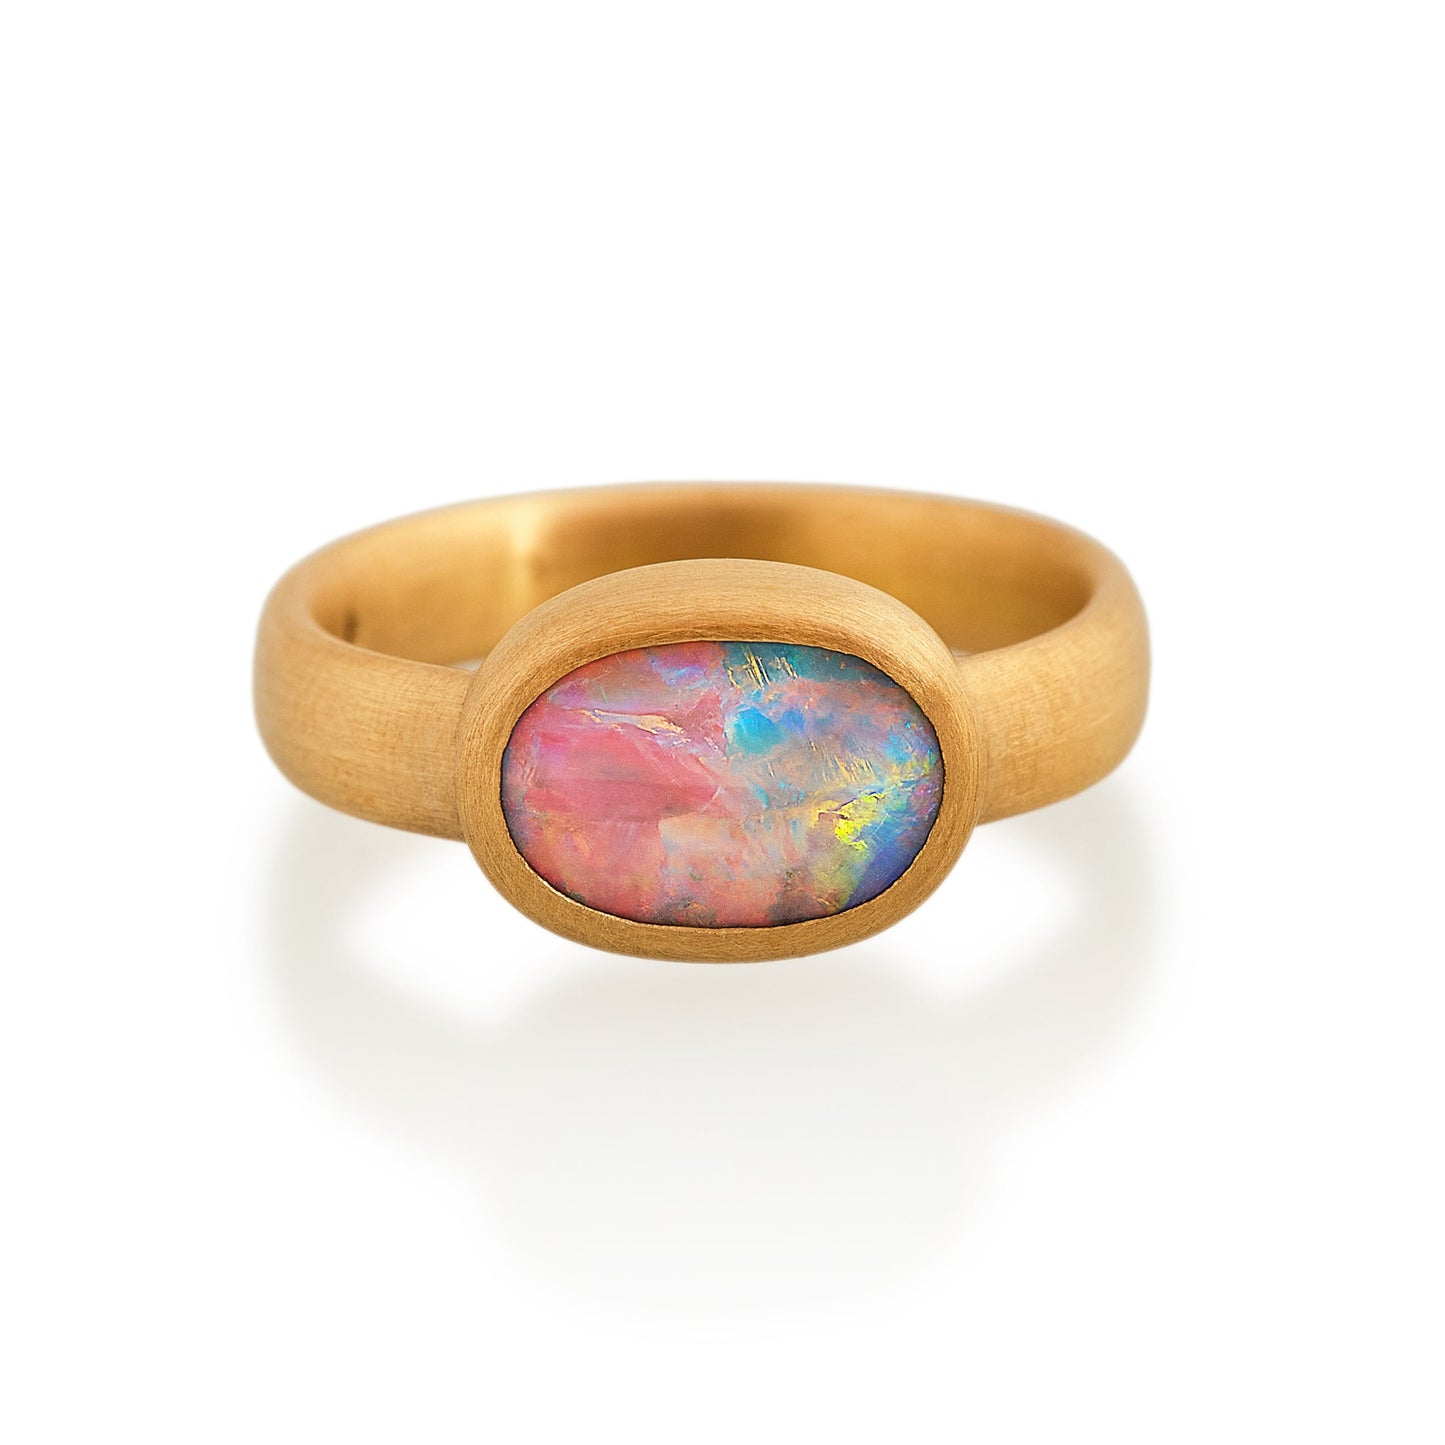 Black Oval Opal Ring, 22ct Gold